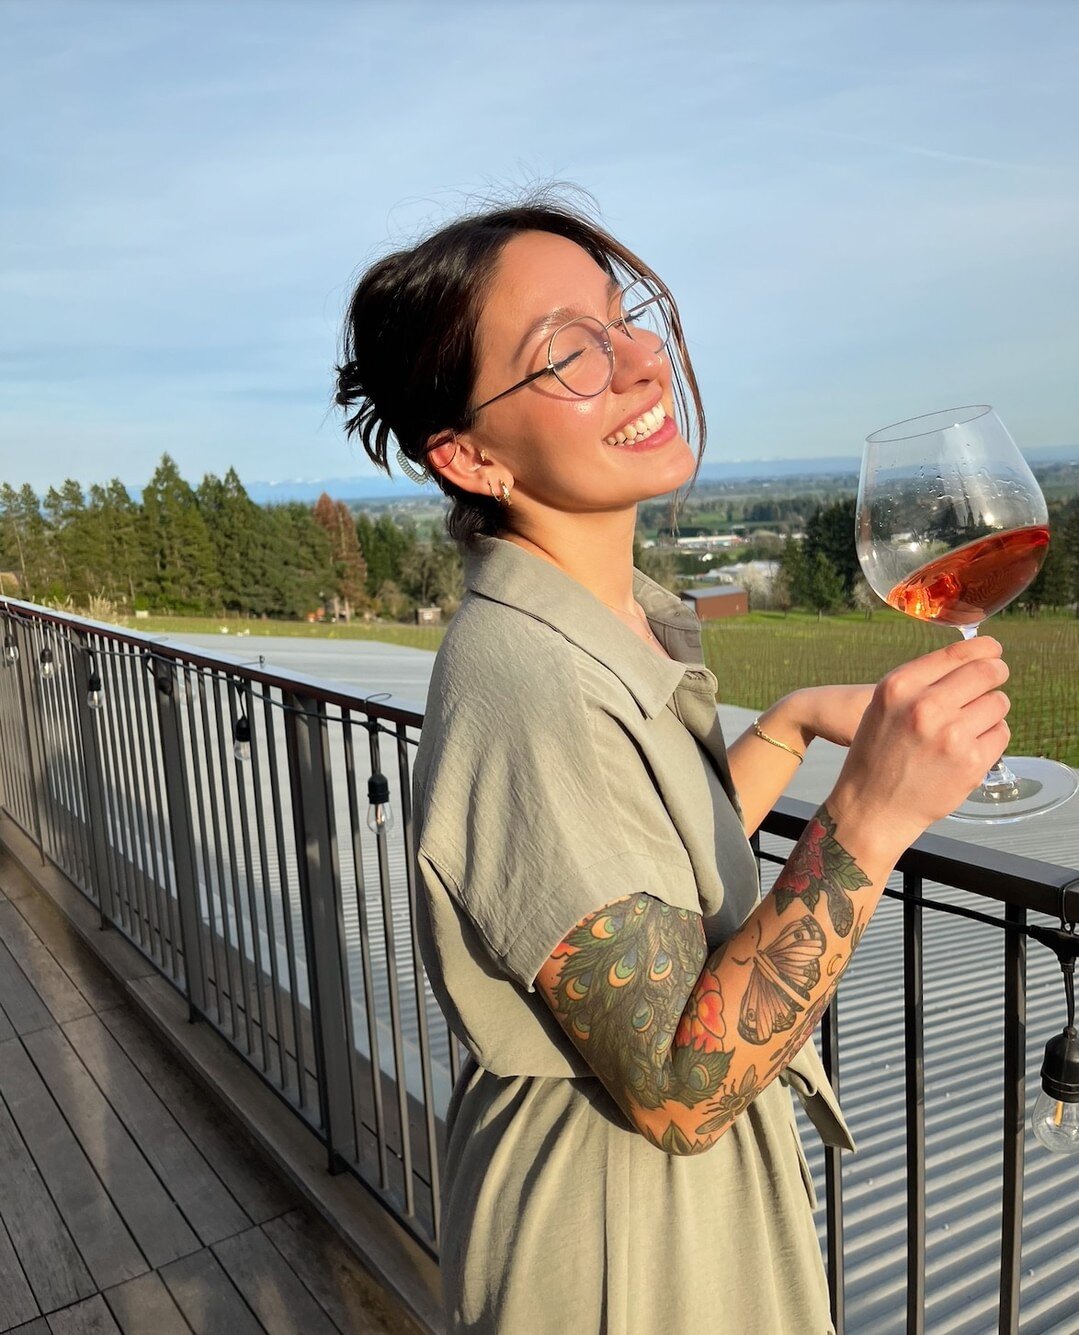 Ros&eacute; Season ☀️⁠
⁠
Sun is on the forecast all week, which means Ros&eacute; season is officially here, and there's never been a better time to enjoy the sunshine!⁠
⁠
Join us this week, enjoy a beautiful wine-tasting experience, and sip on our R